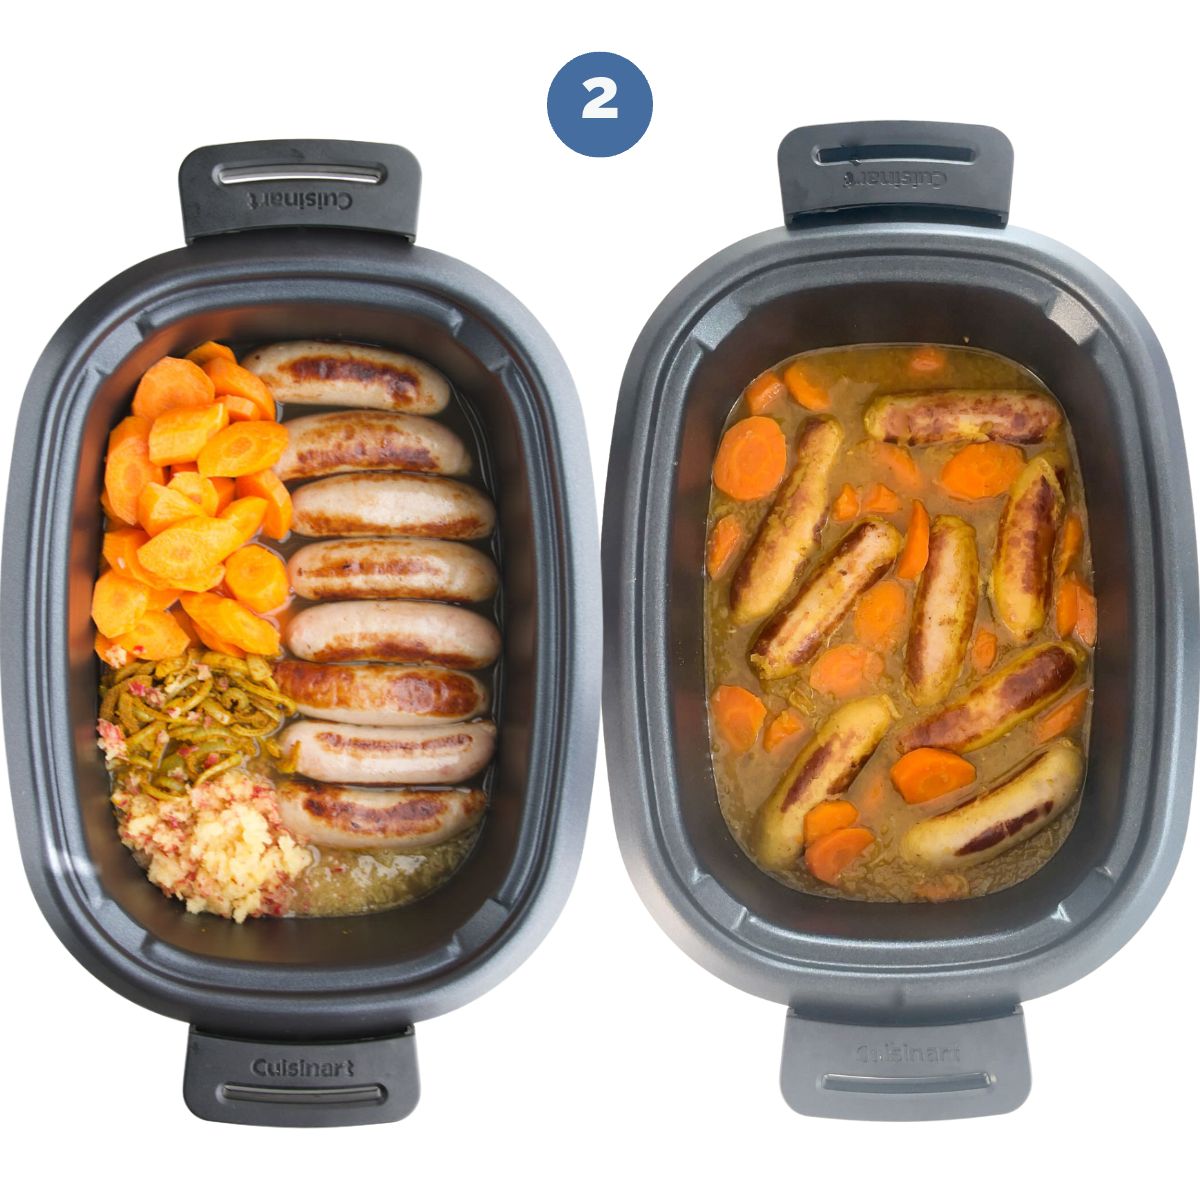 Collage of Two Images. Slow Cooker with Curried Sausages Ingredients Before Cooking and After Cooking.